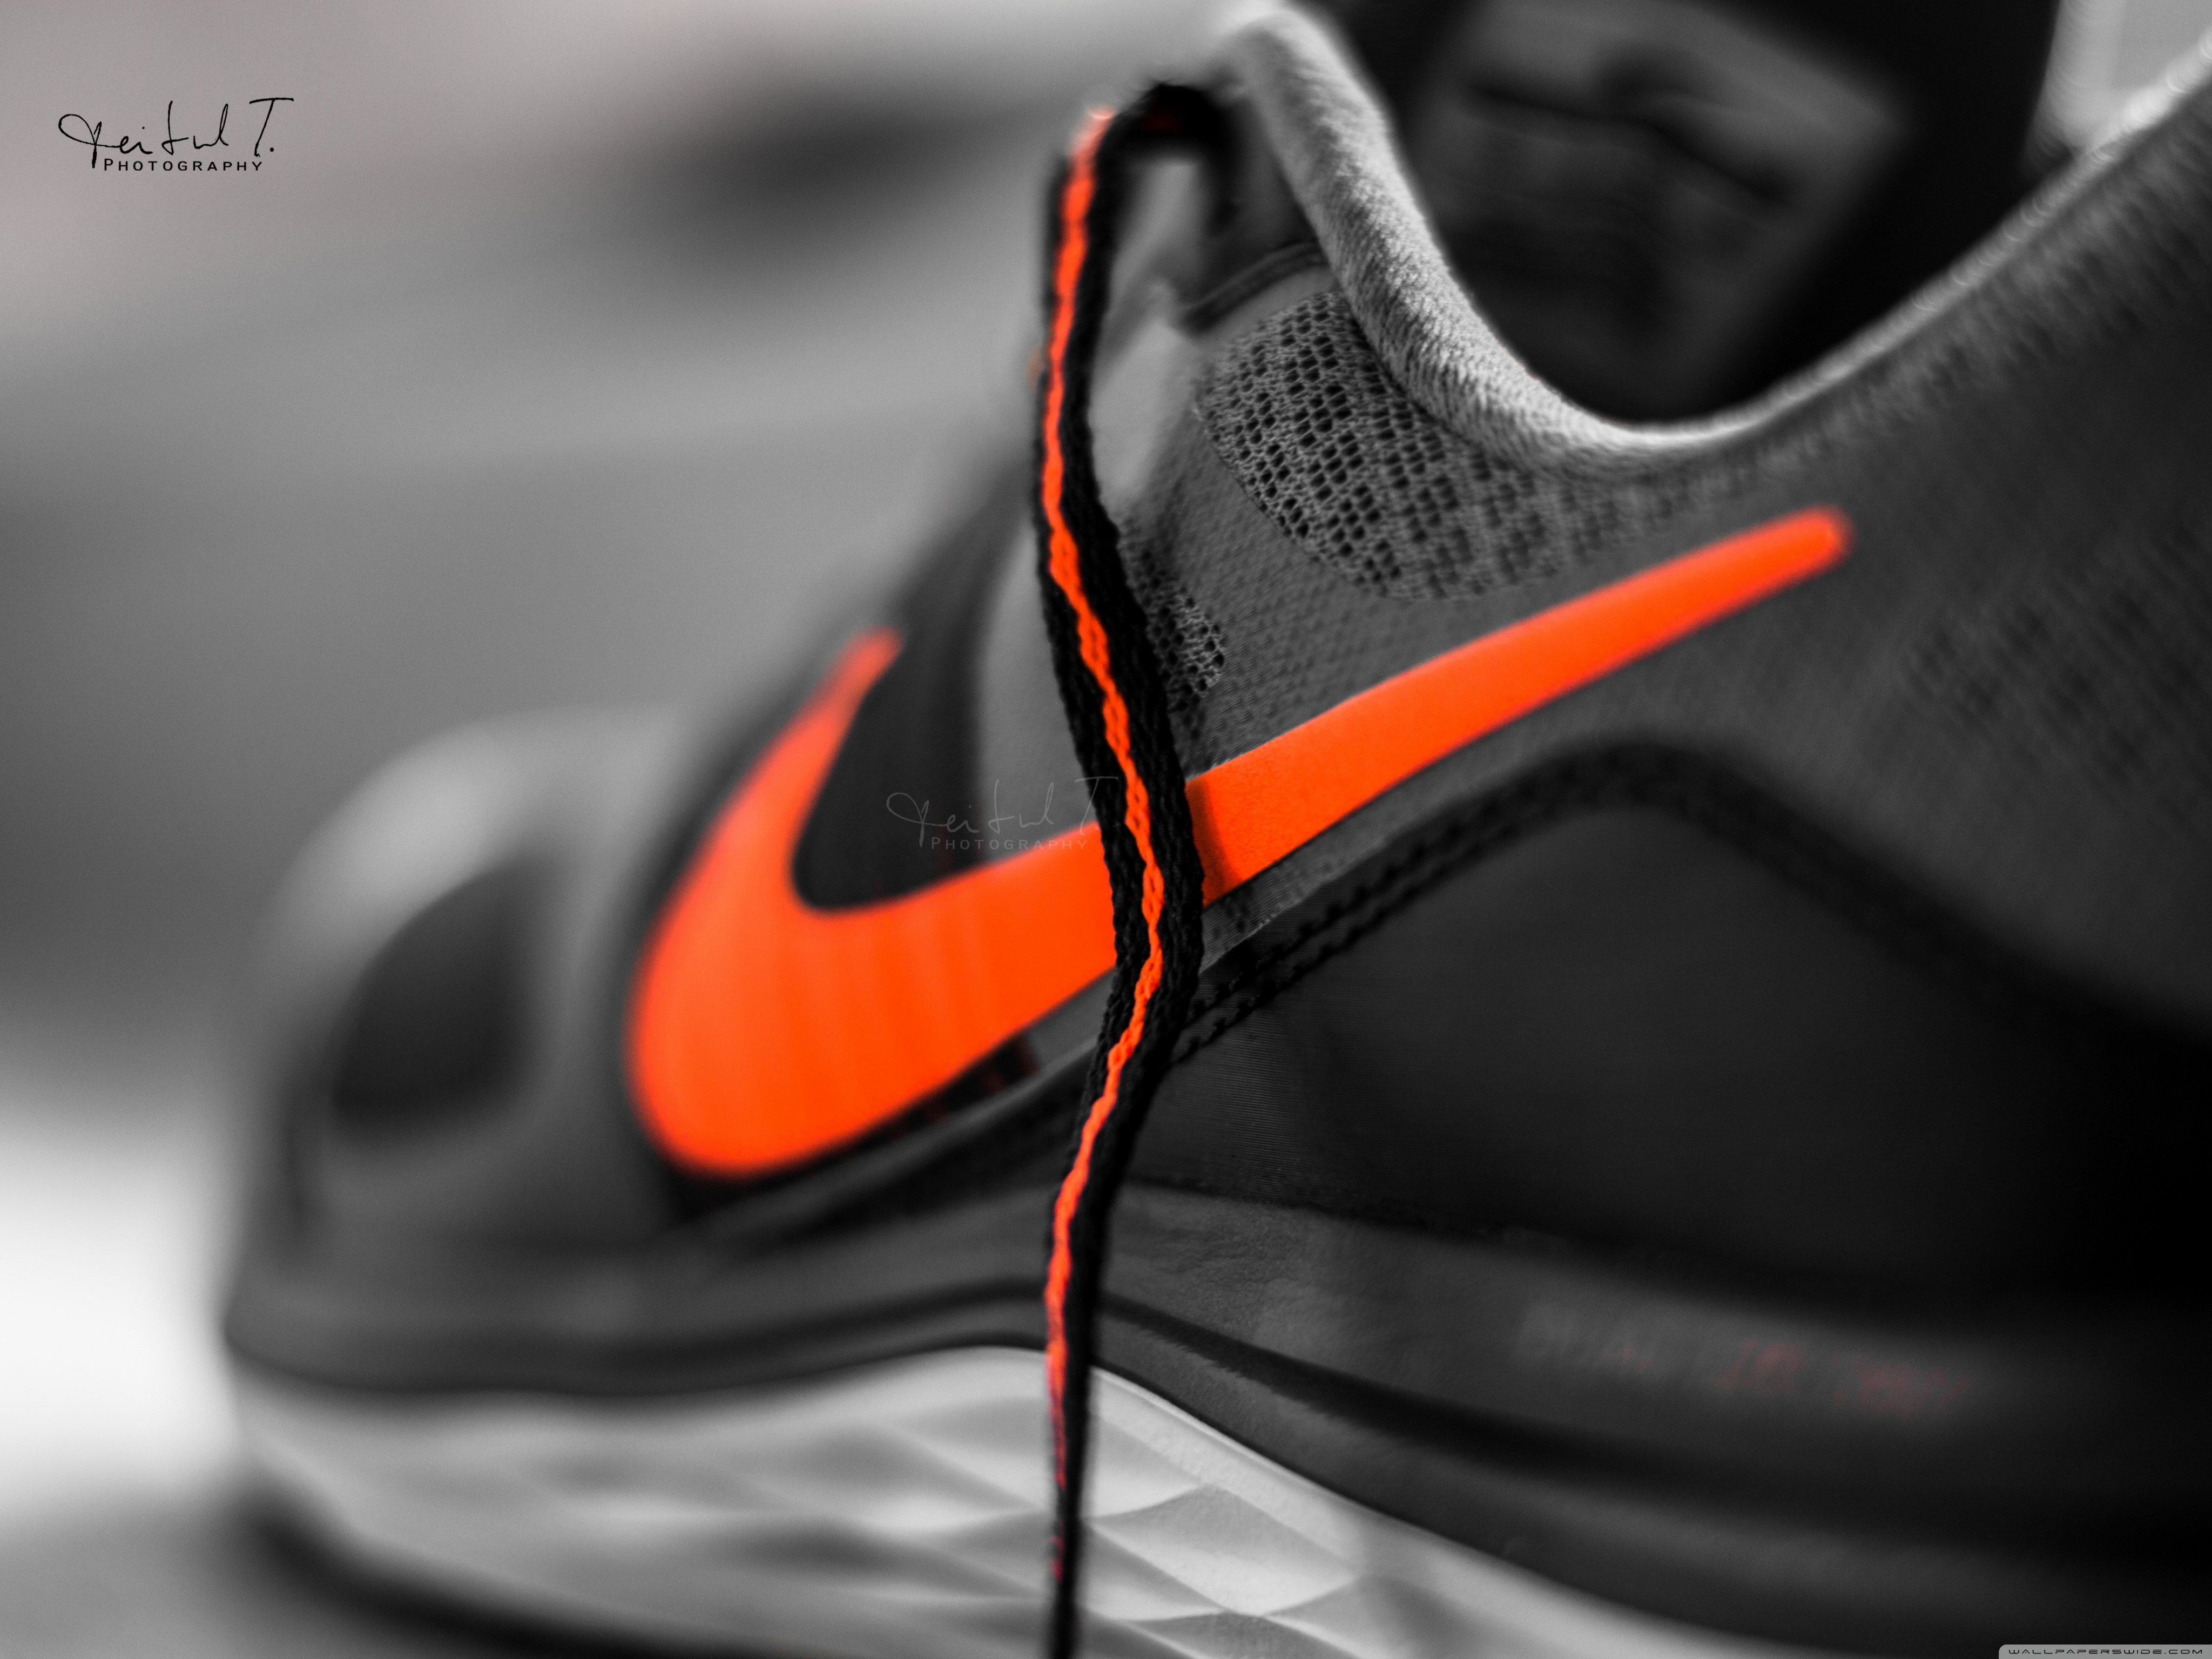 Nike Shoes Black Cool Wallpapers